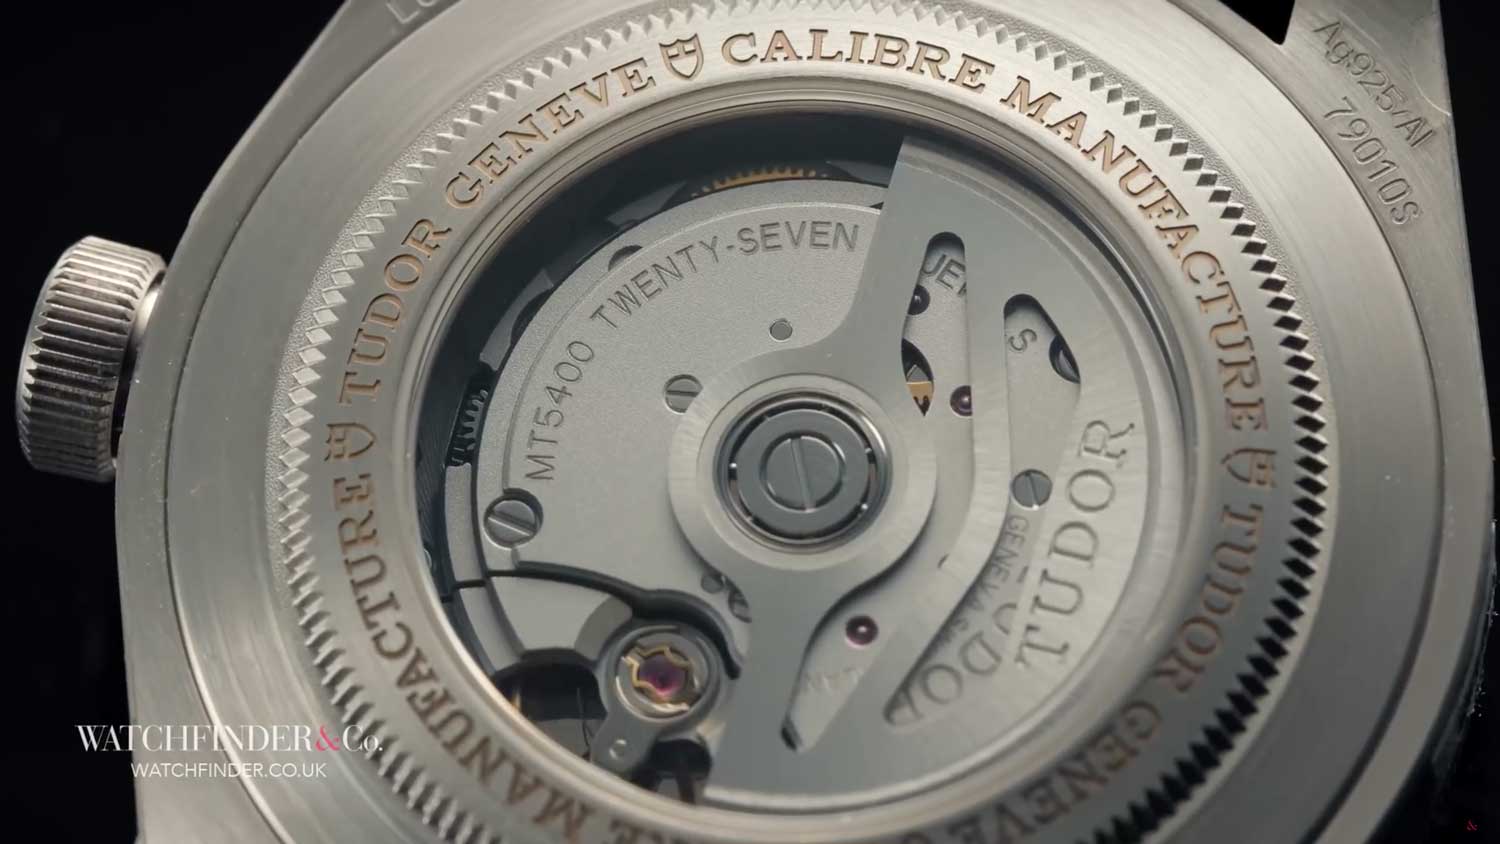 The watch is powered by a new calibre, the MT5400, visible through the open display caseback.